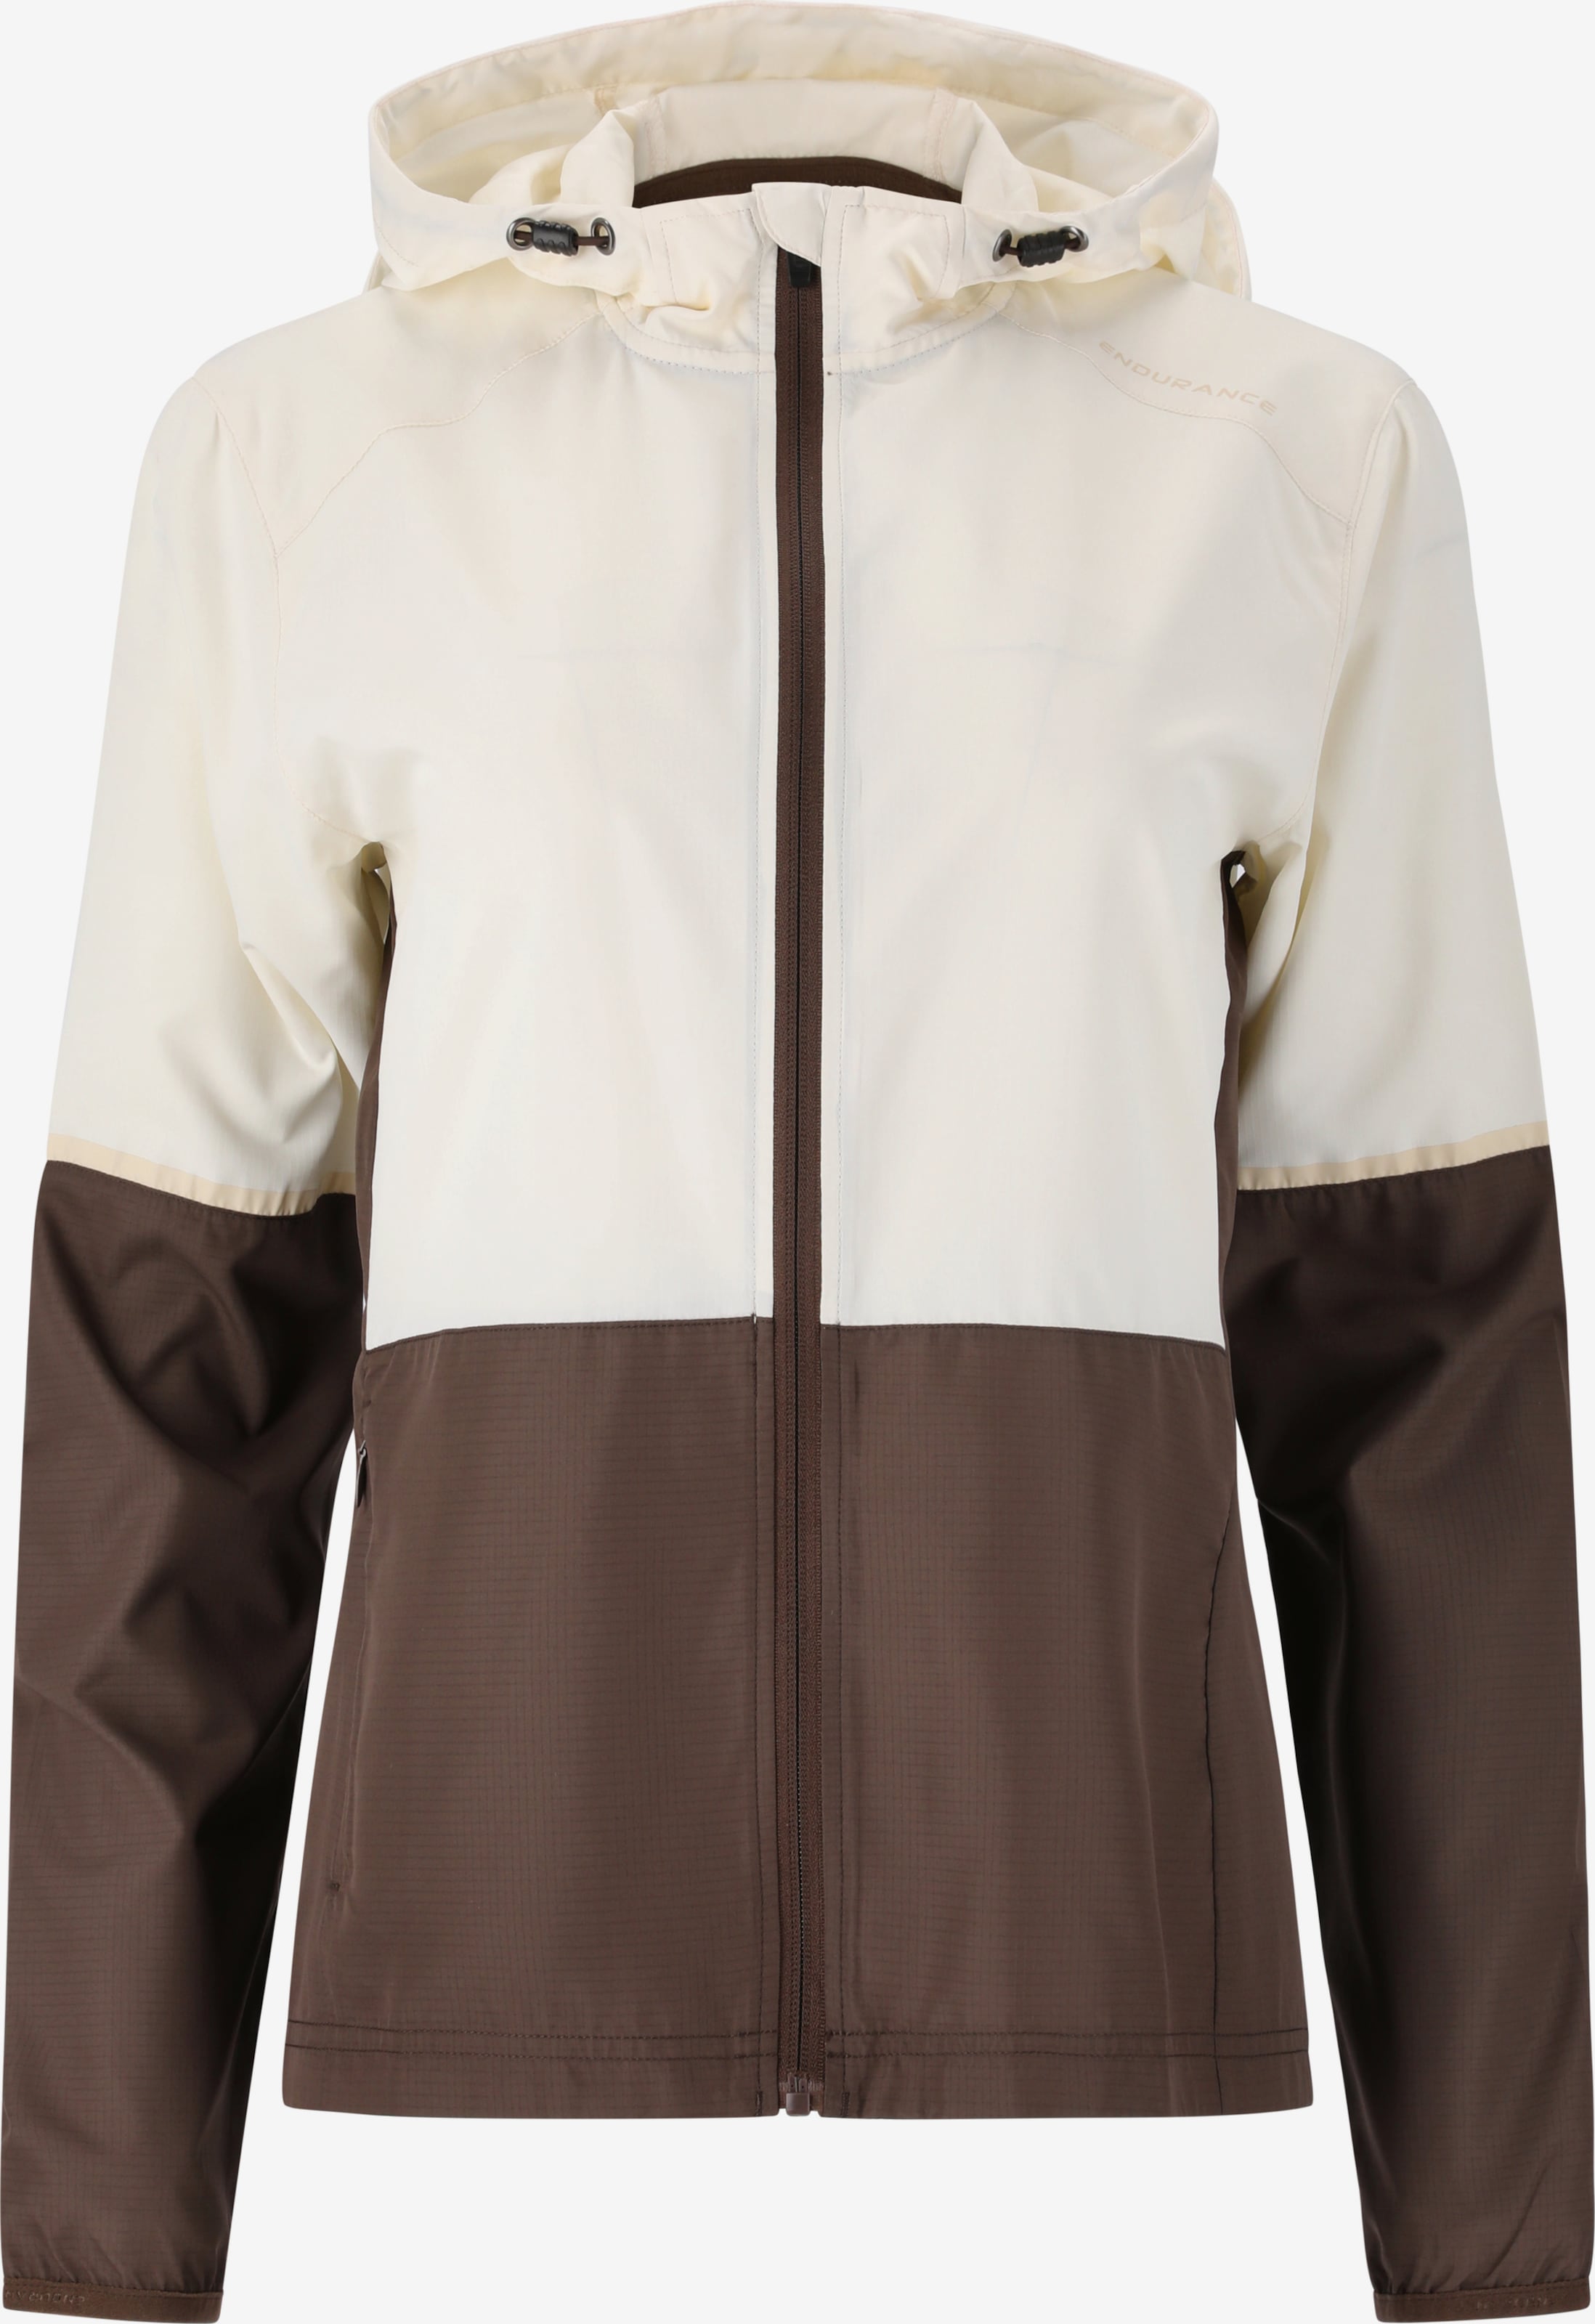 ENDURANCE Athletic Jacket in YOU ABOUT Beige Kinthar\' | 